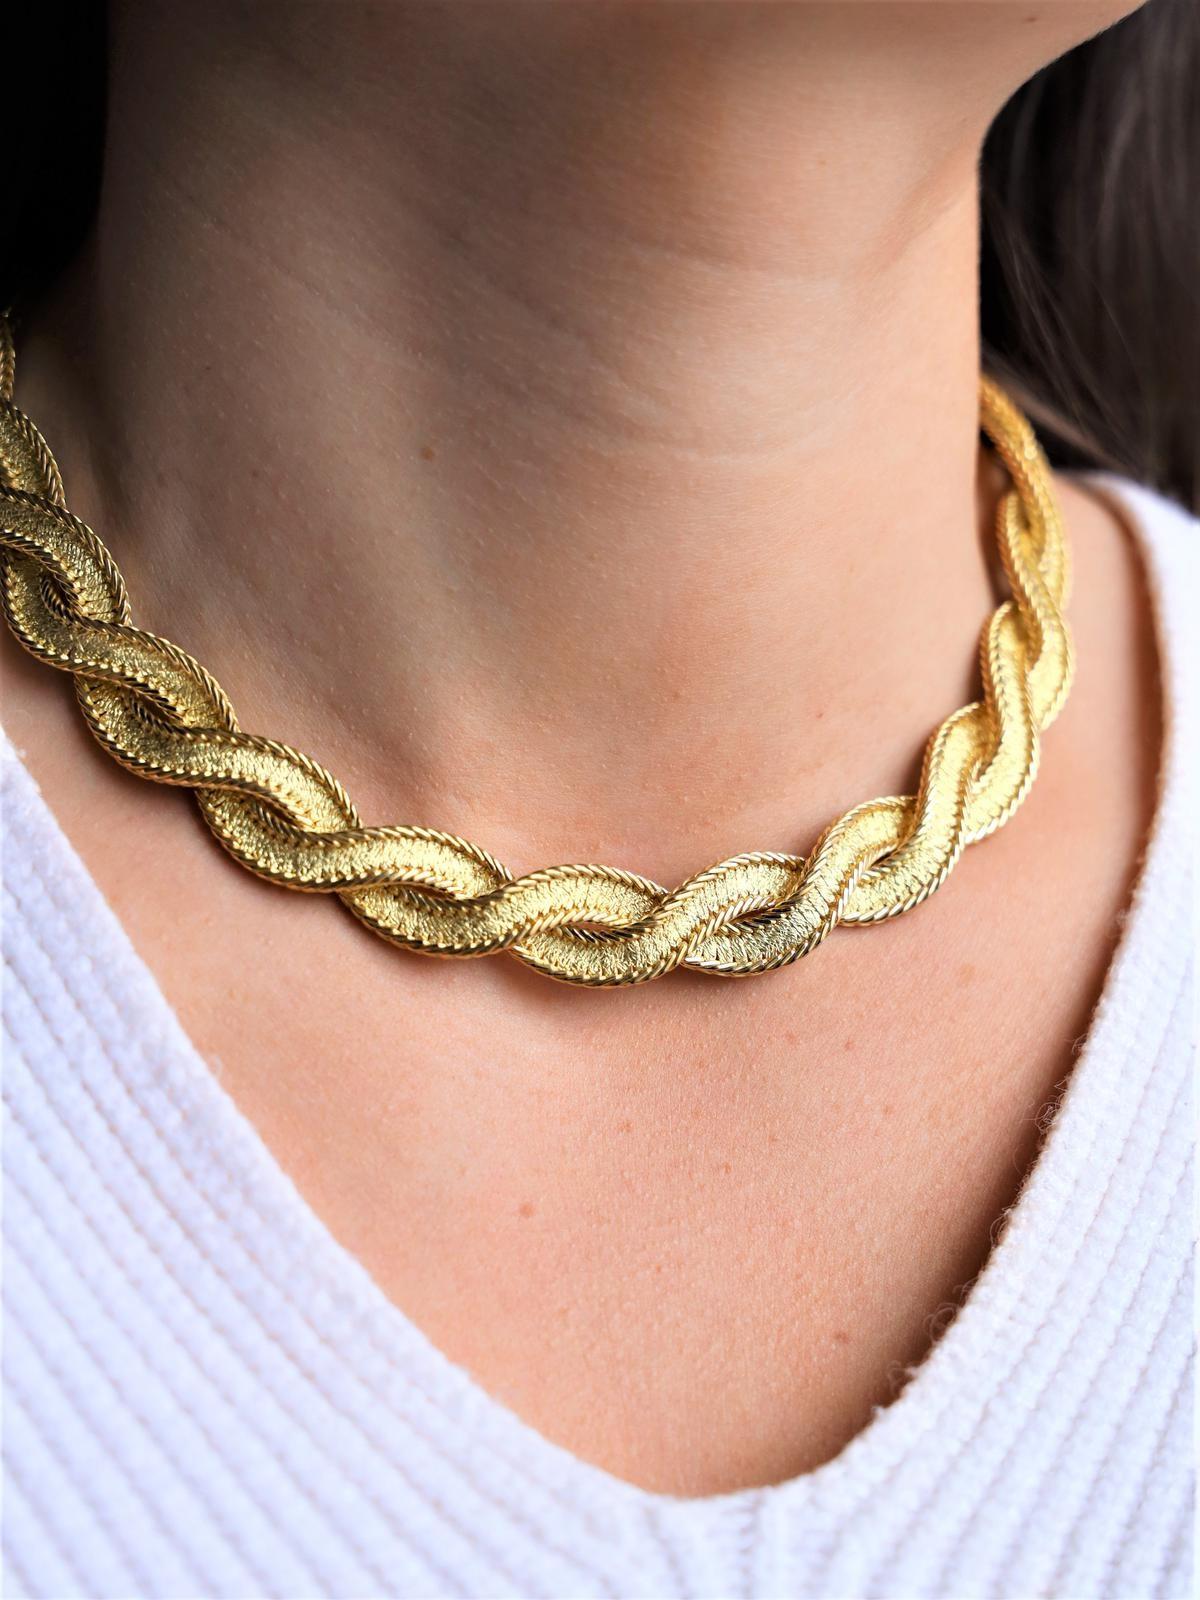 Necklace in yellow gold 750 thousandths (18 carats). twisted fancy mesh. length: 43 cm. width: 1.39 cm. total weight: 96.62 g. eagle head hallmark. excellent condition